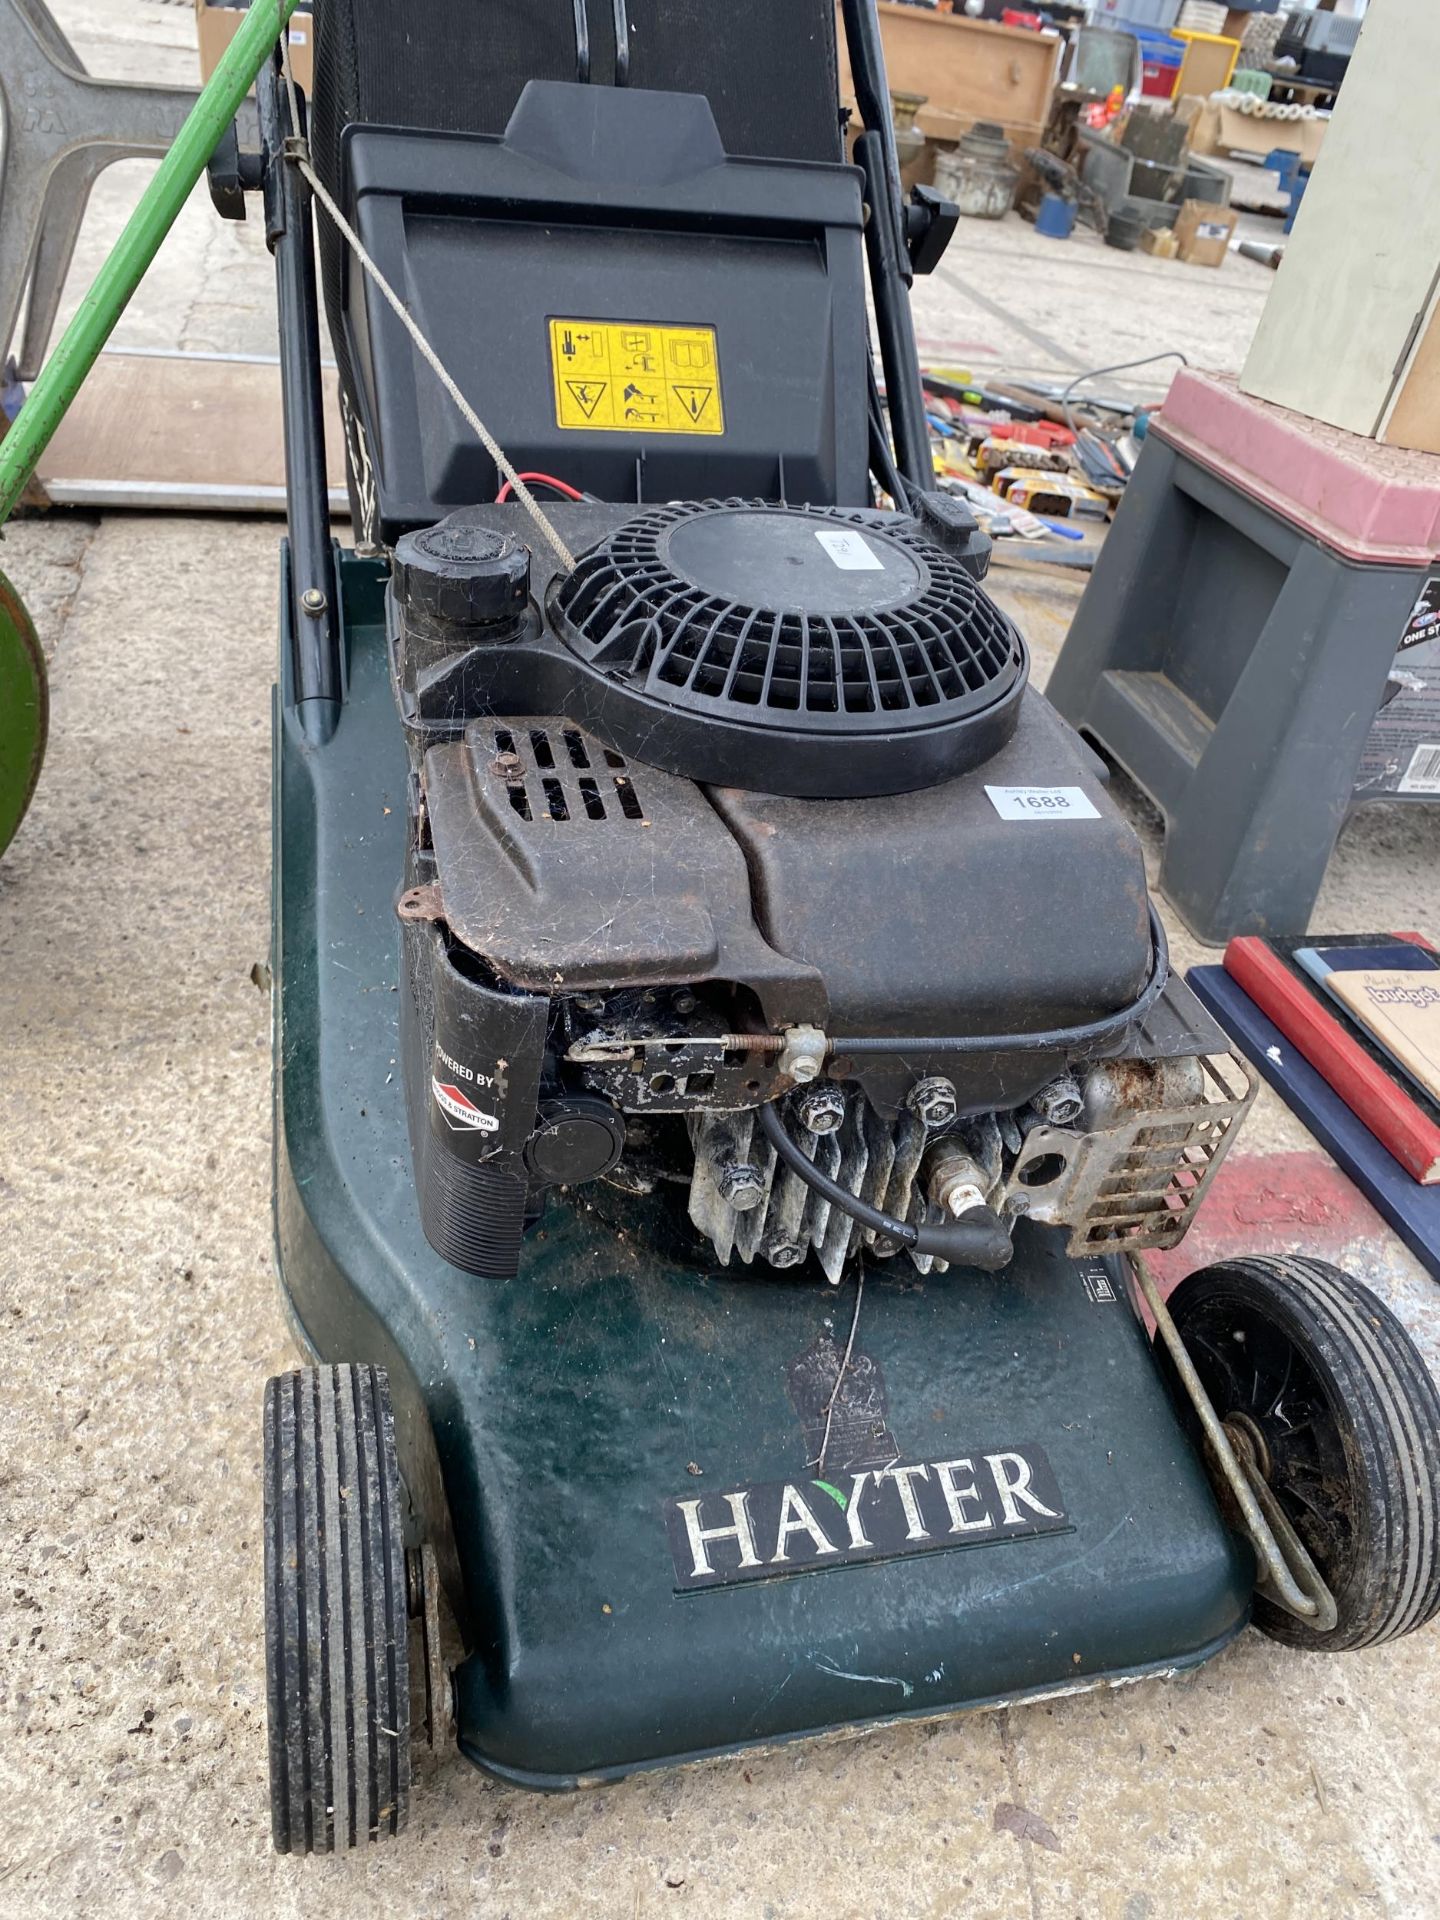 A HAYTER ROTARY LAWN MOWER WITH GRASS BOX AND A SMALL GARDEN ROLLER - Bild 2 aus 3